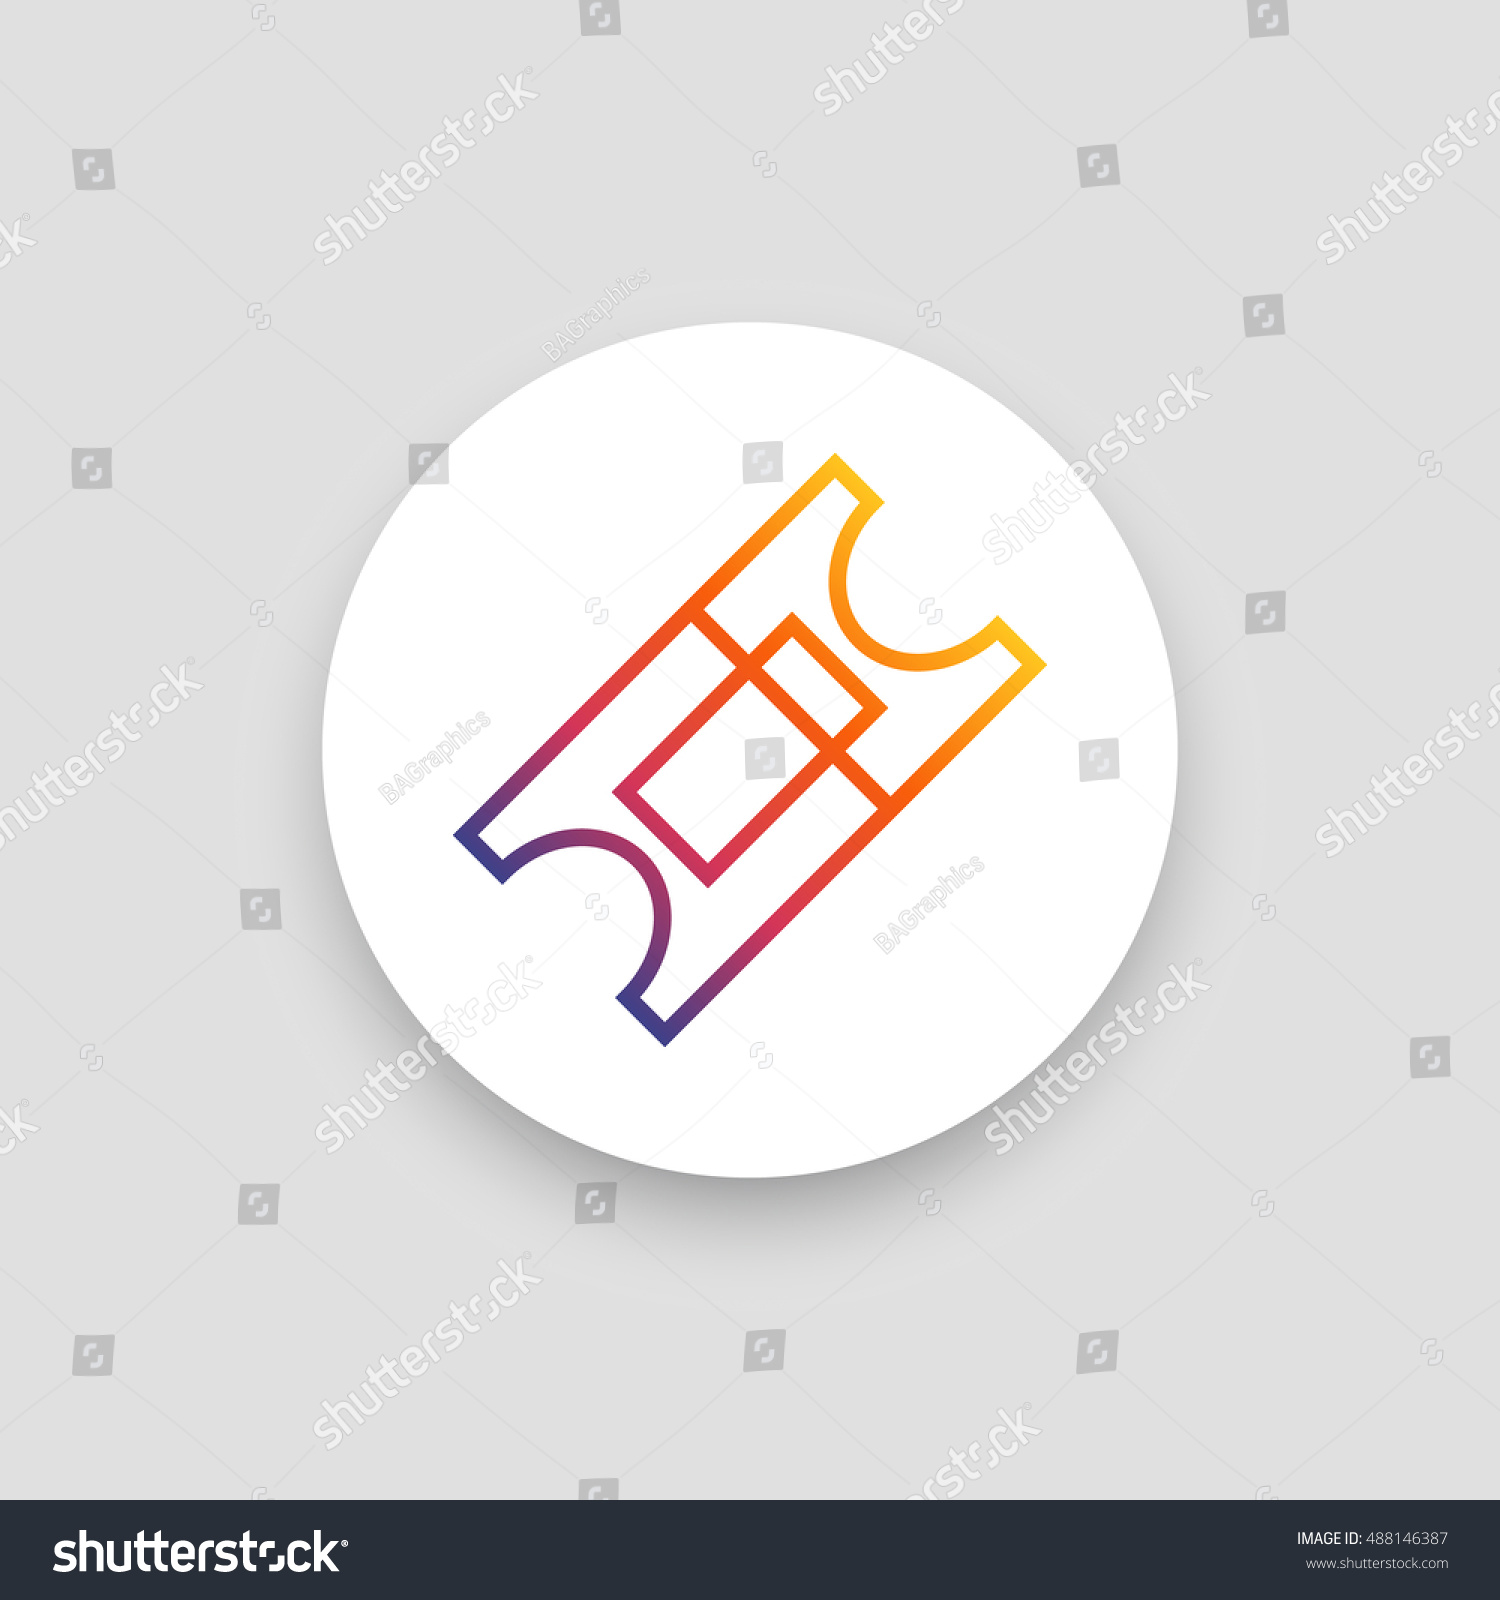 SVG of Ticket icon vector, clip art. Also useful as logo, circle app icon, web element, symbol, graphic image, silhouette and illustration. Compatible with ai, cdr, jpg, png, svg, pdf, ico  and eps formats. svg